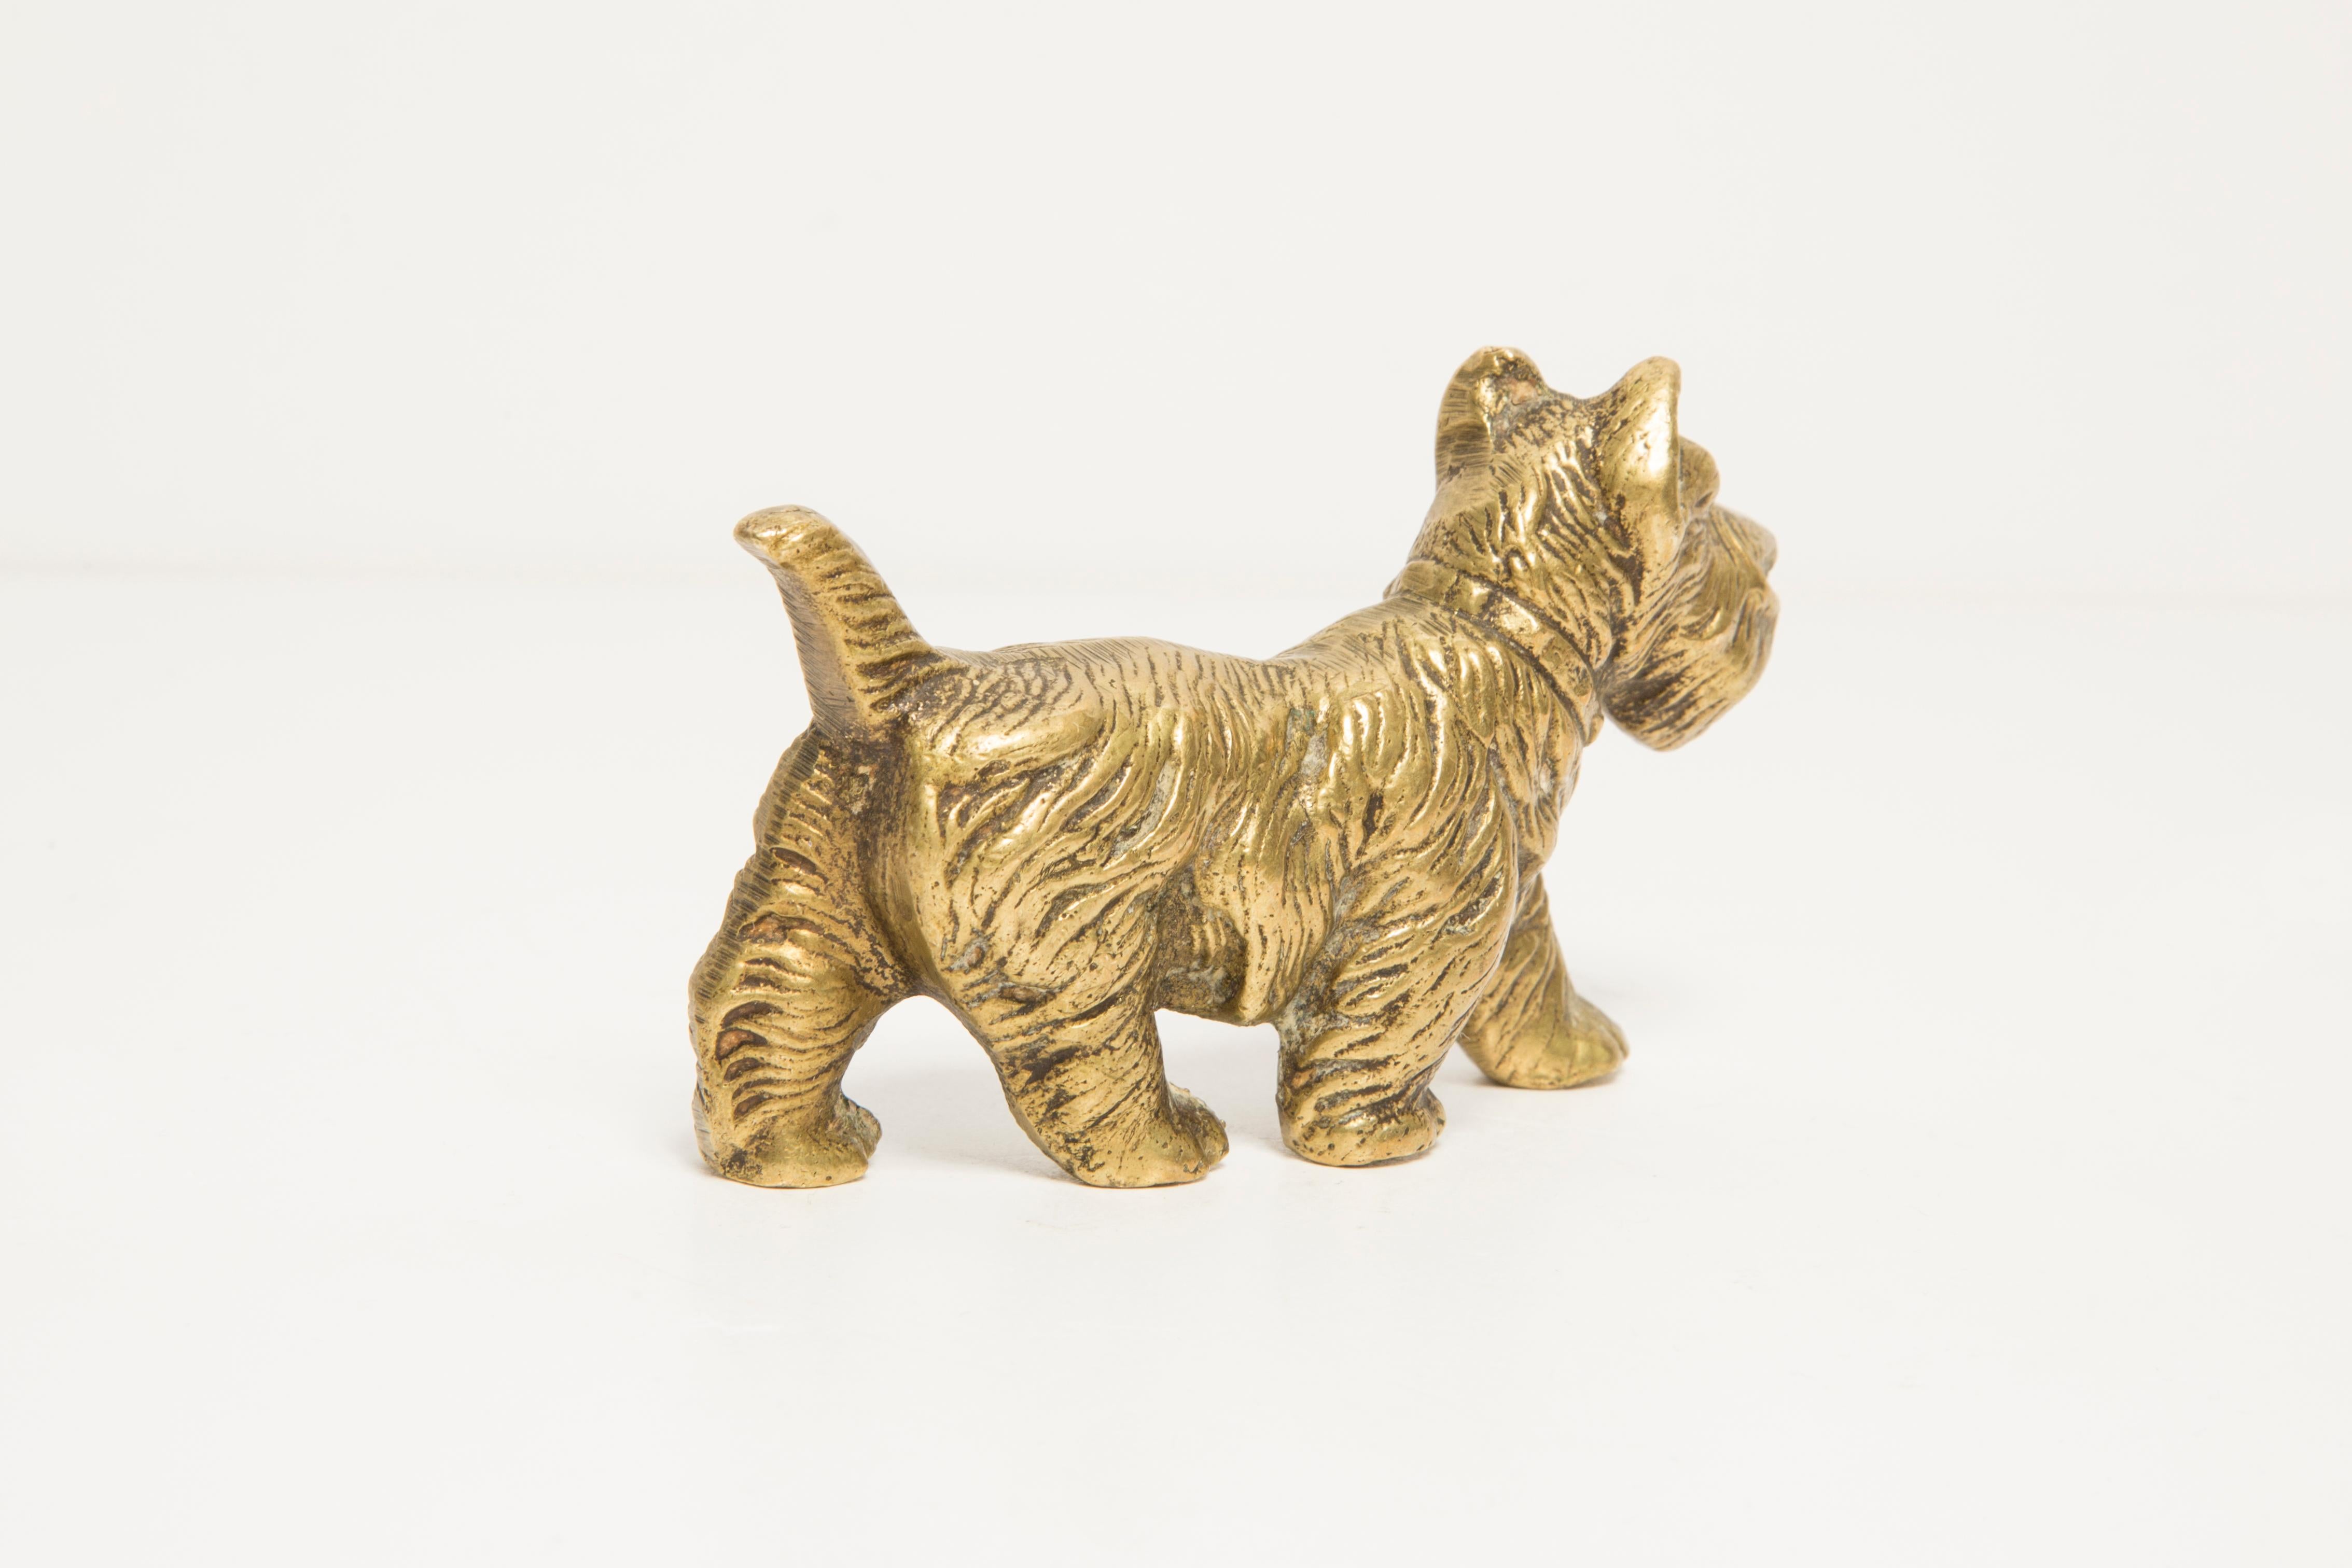 Midcentury West Terrier Dog Gold Metal Decorative Sculpture, Italy, 1950s For Sale 1